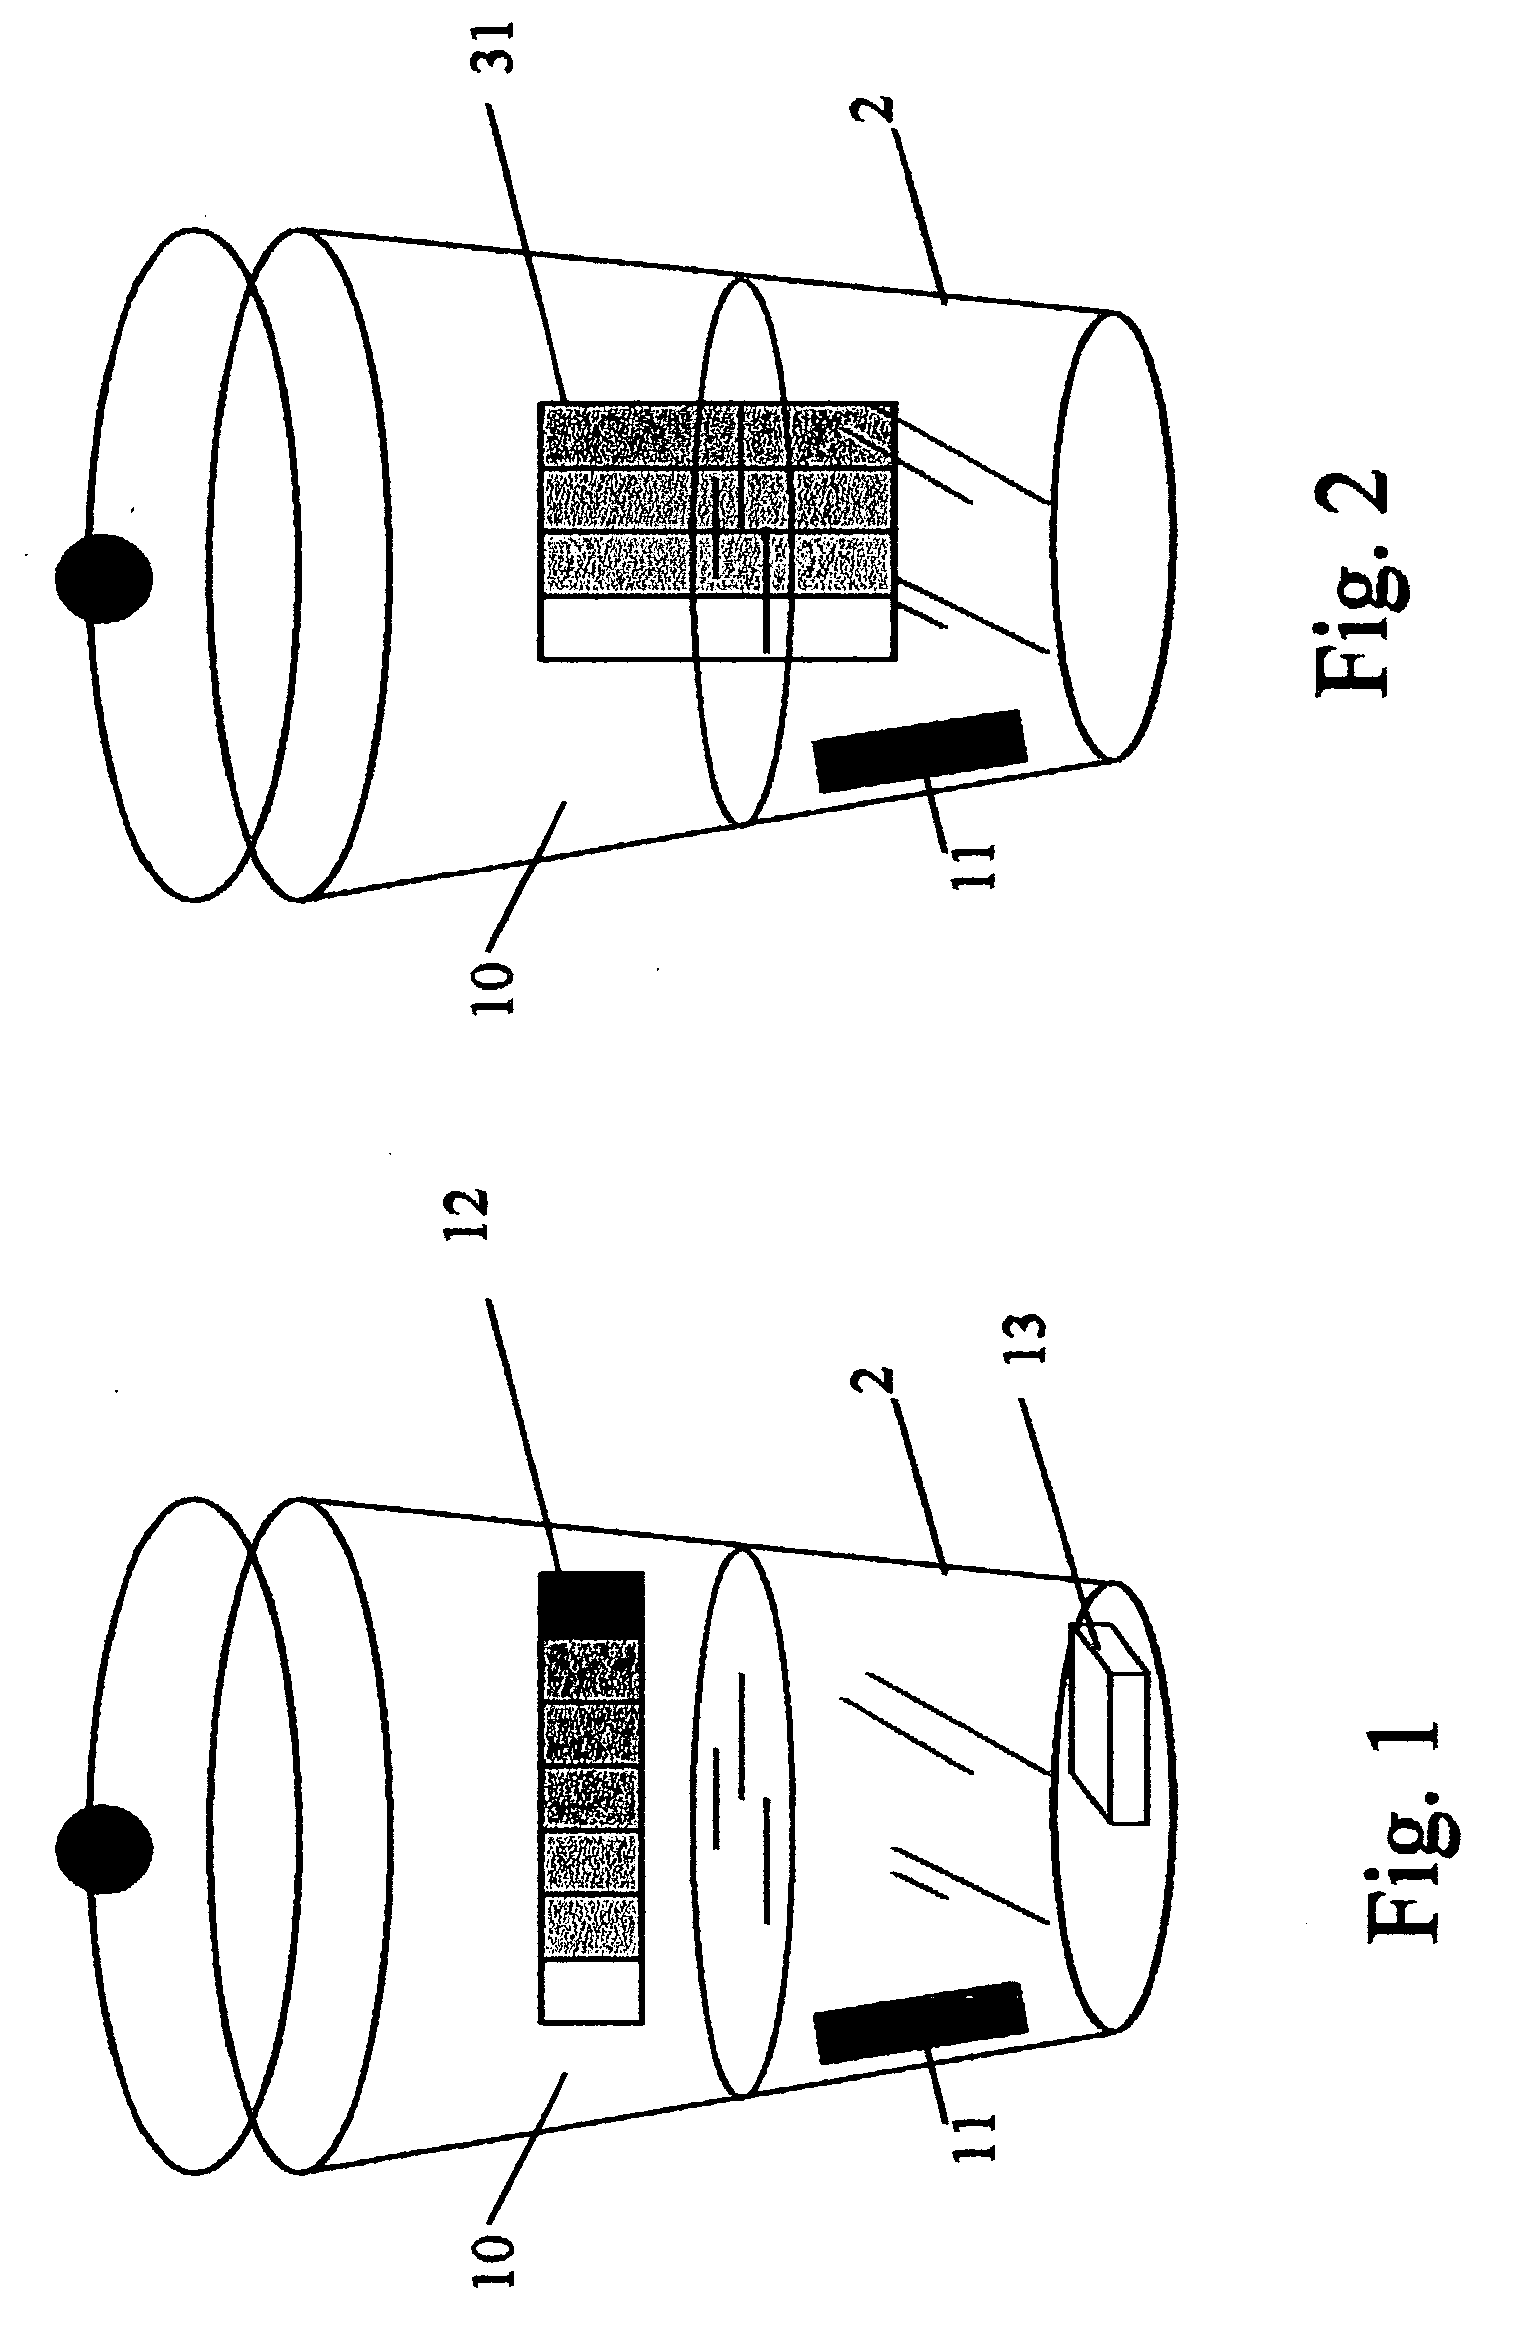 Temperature-display non-electric heated utensil device